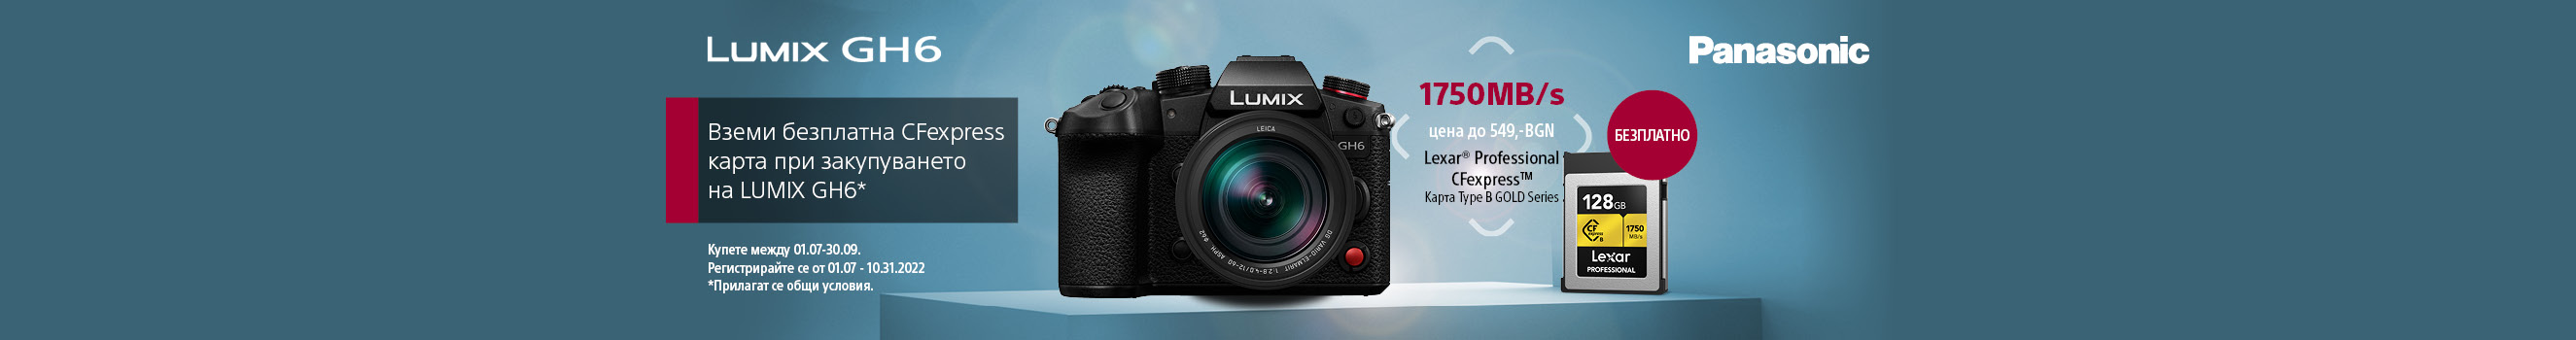  Get the new Panasonic Lumix GH6 with extended warranty and free memory card